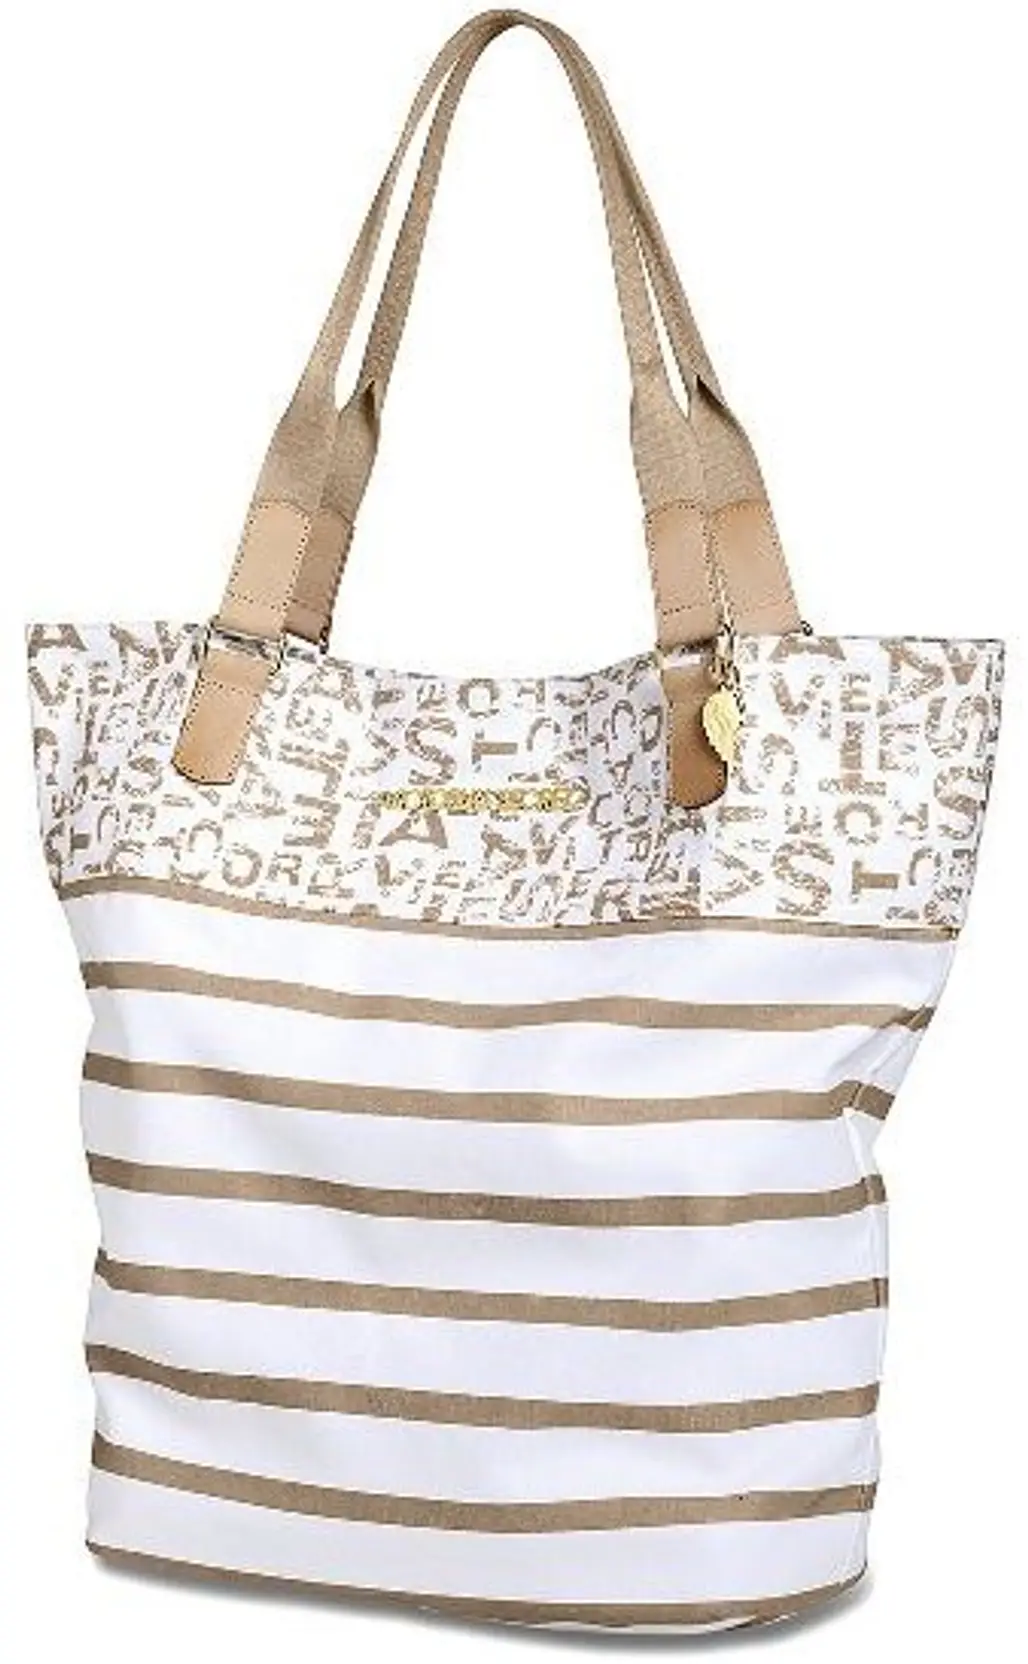 15 Trendy Summer Totes ...